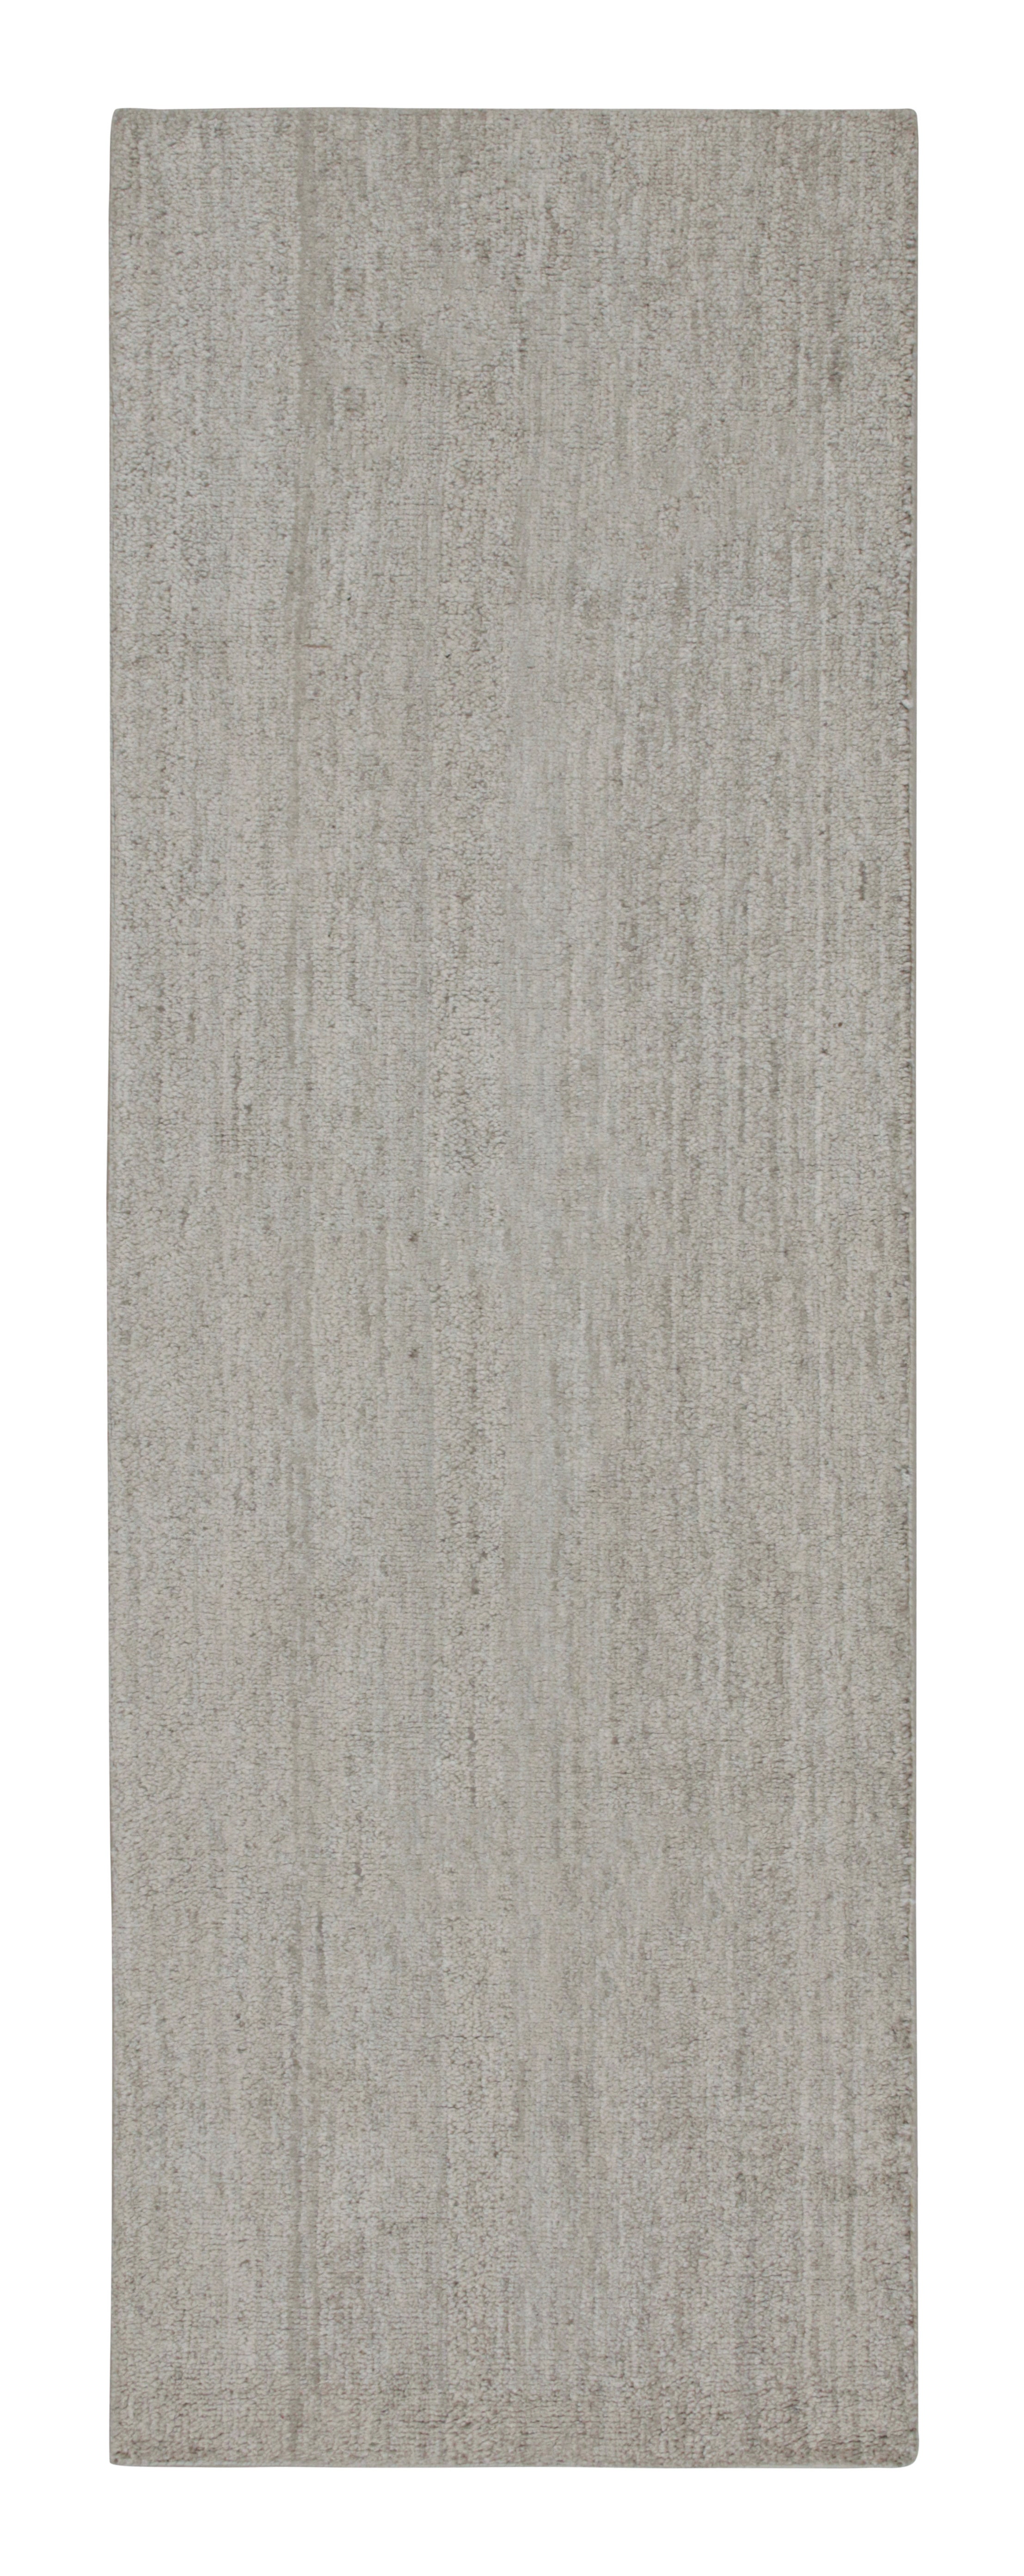 Rug & Kilim’s Contemporary Runner and Textural Rug in Solid Gray Striae For Sale